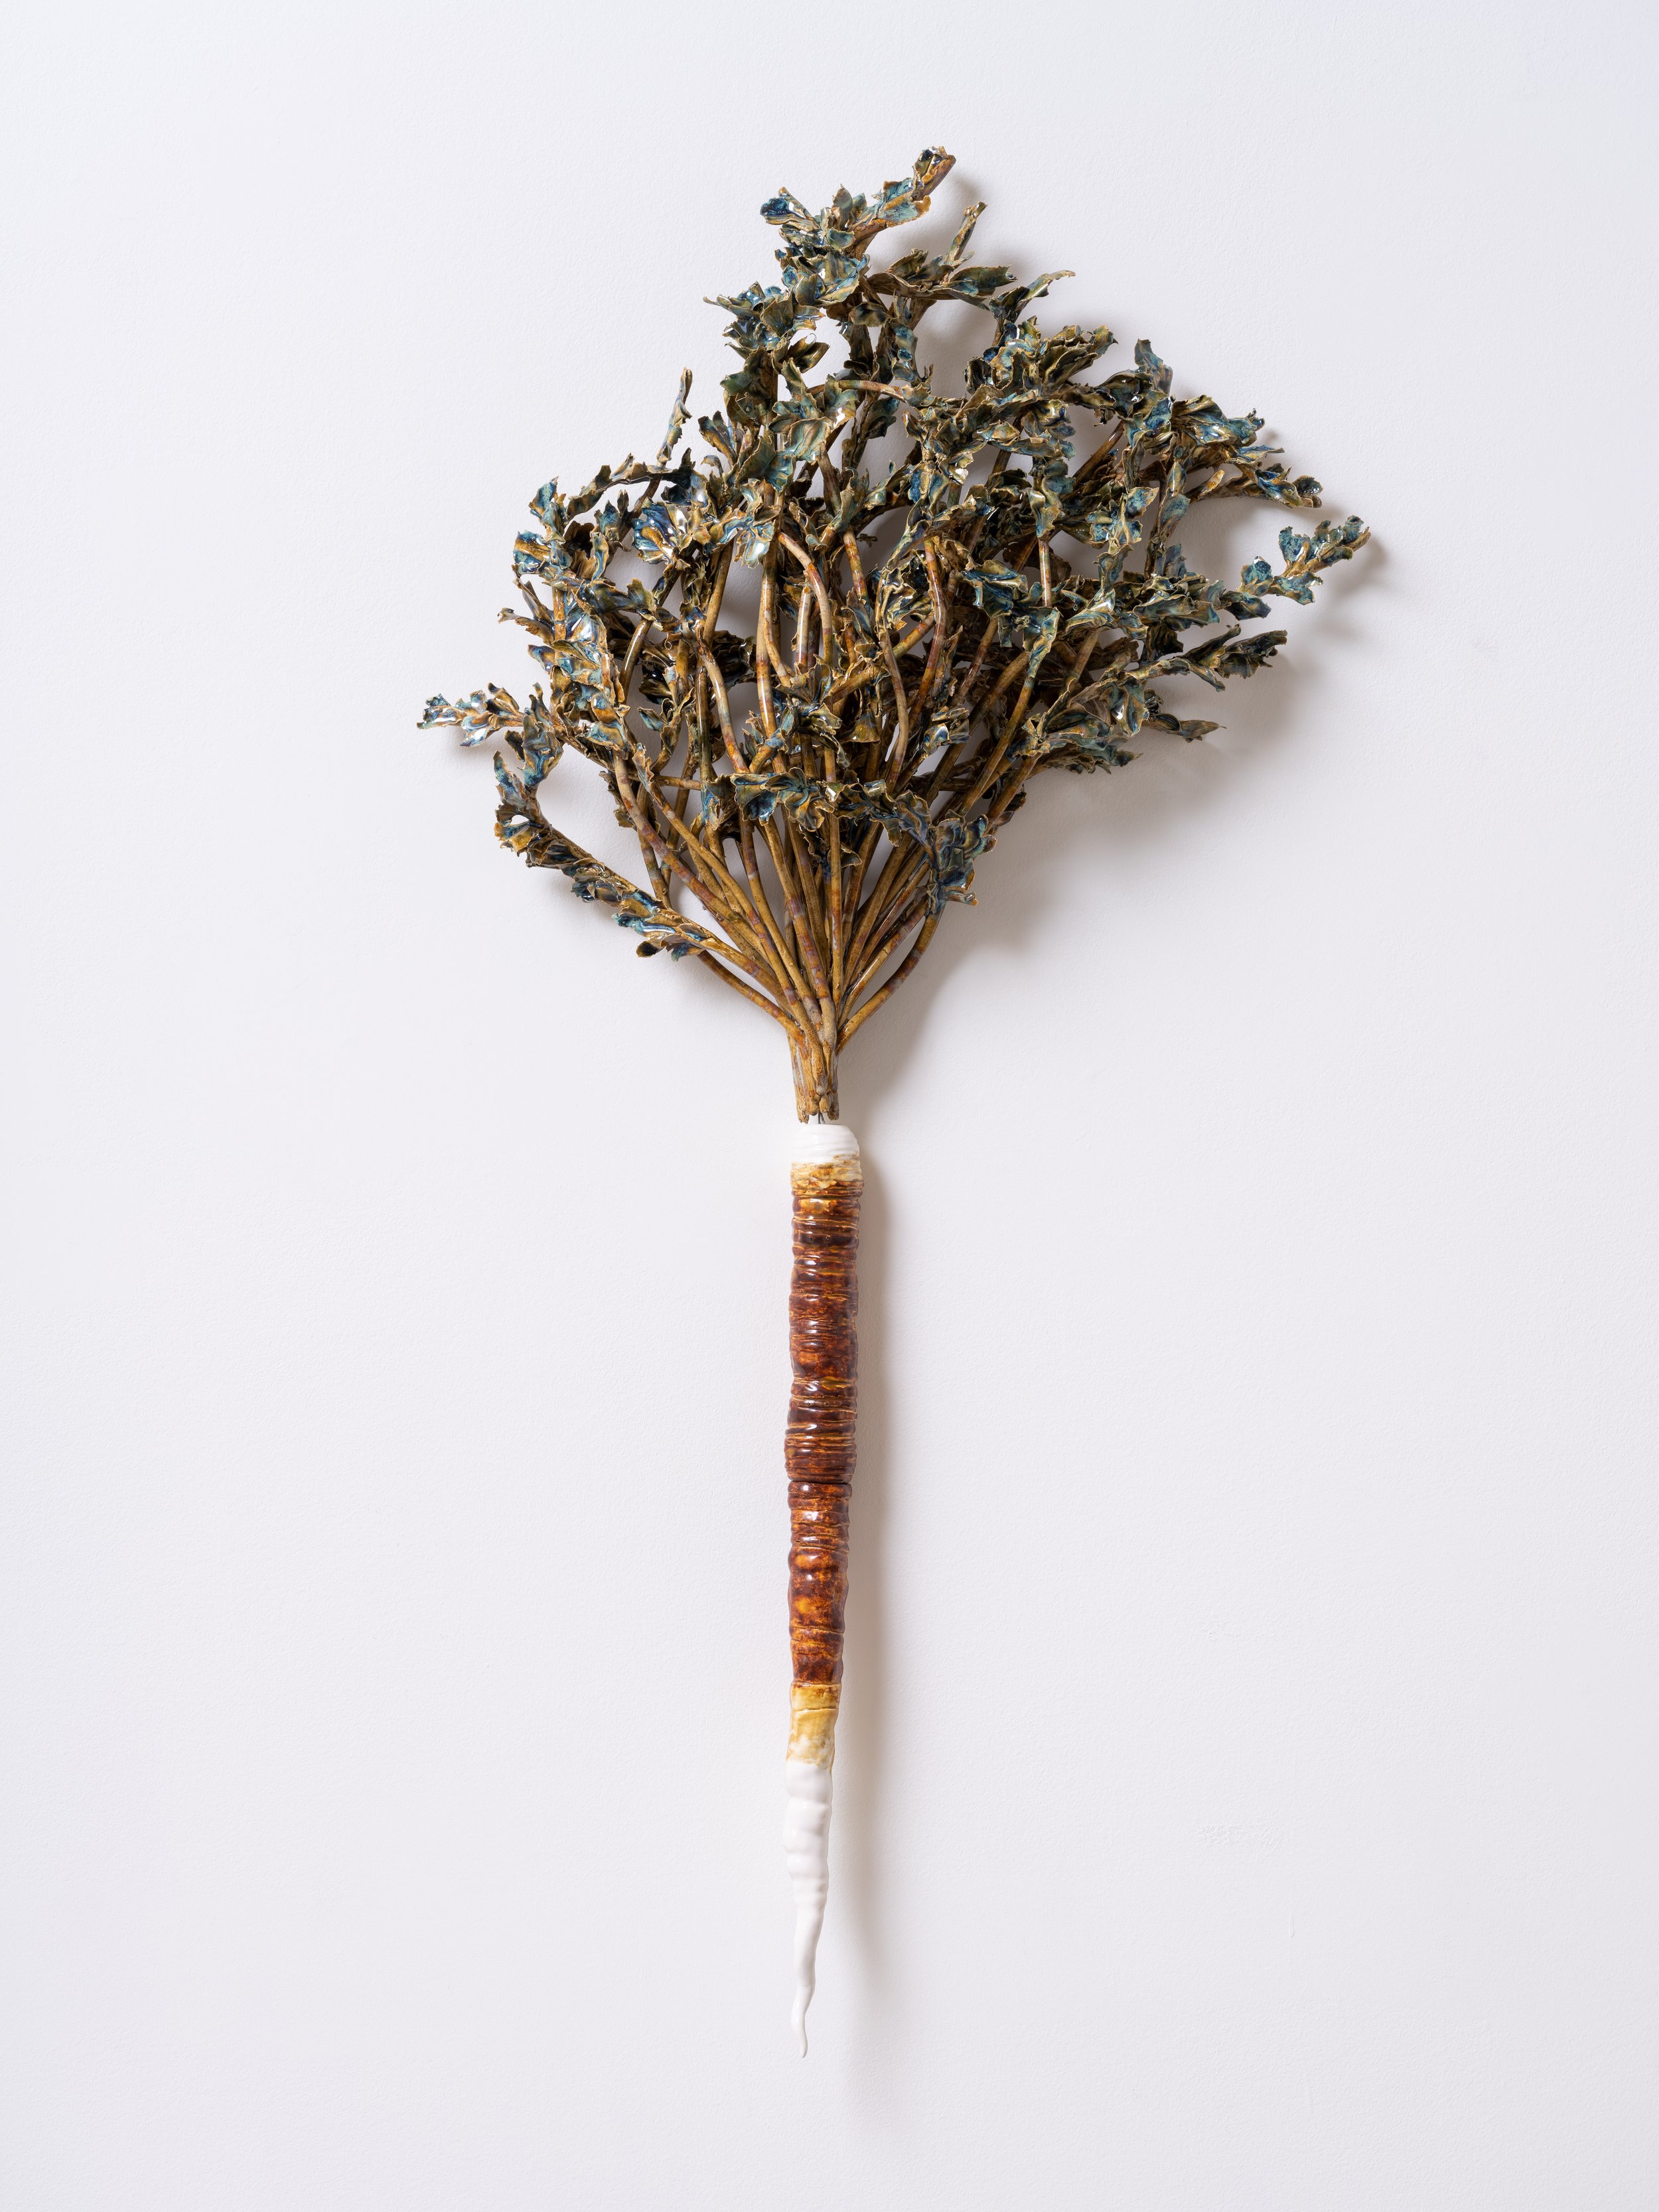   Carrot with Stem , 2022  Glazed stoneware and porcelain  50 x 24 x 8 inches (127 x 61 x 20.3 cm)&nbsp; 